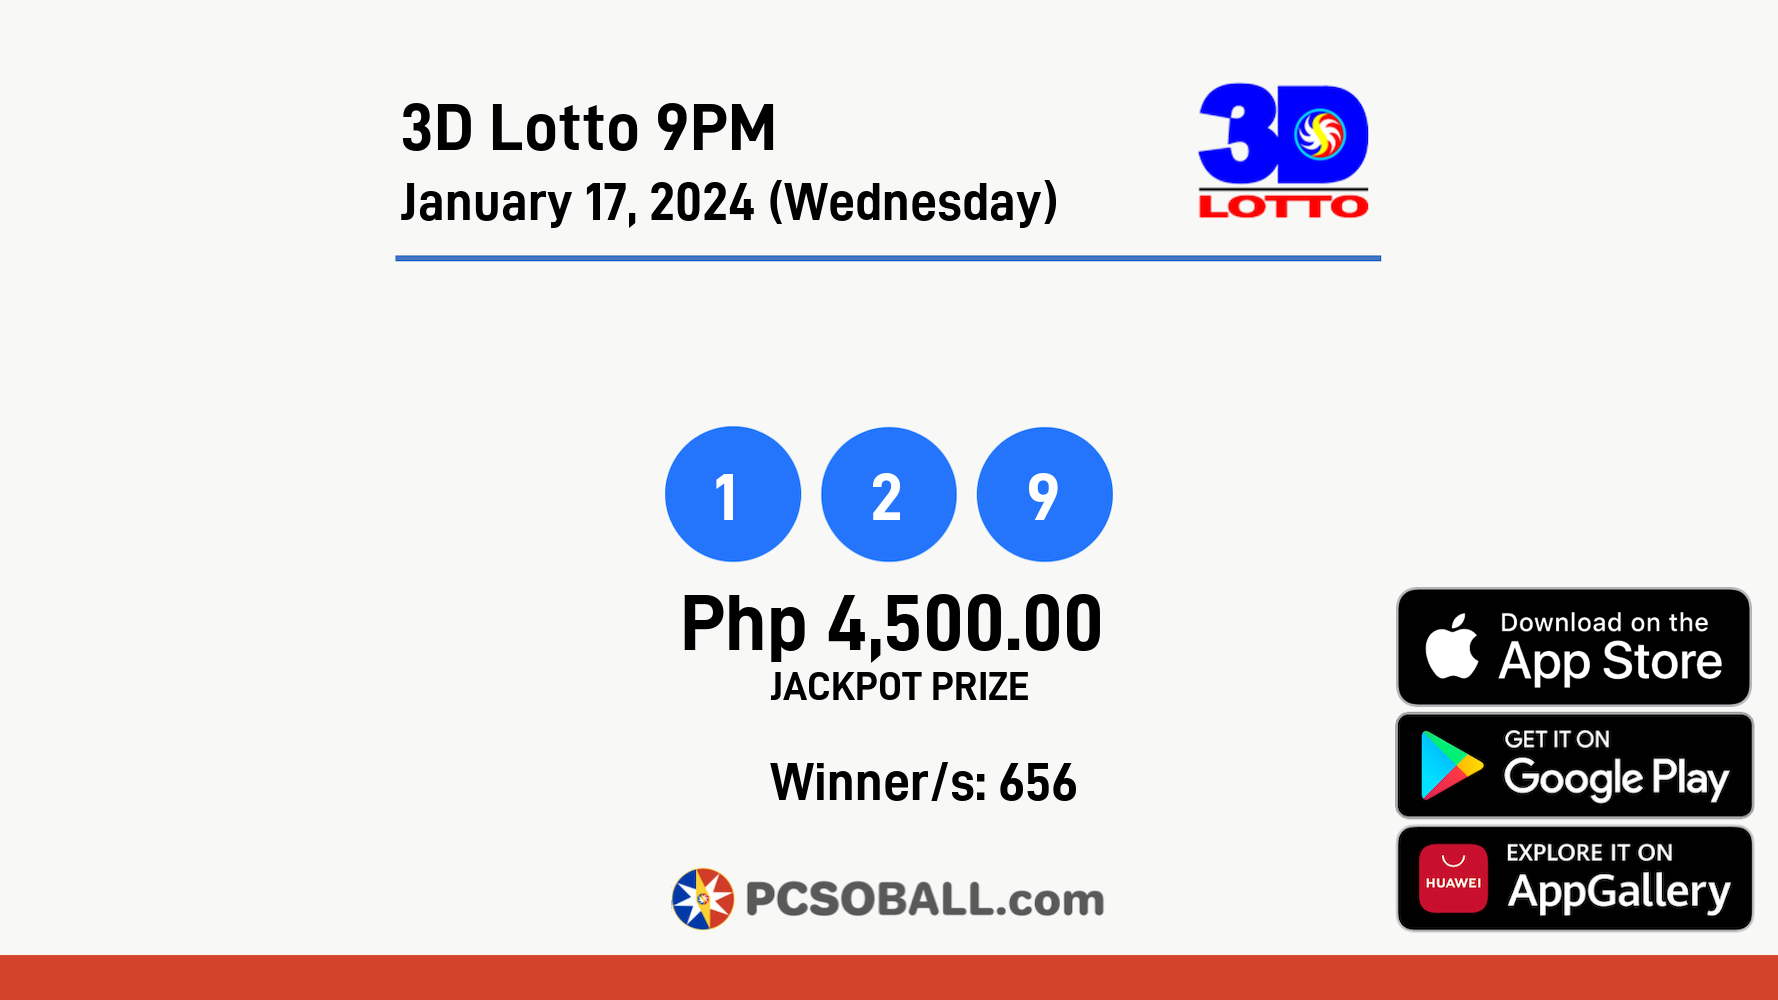 3D Lotto 9PM January 17, 2024 (Wednesday) Result